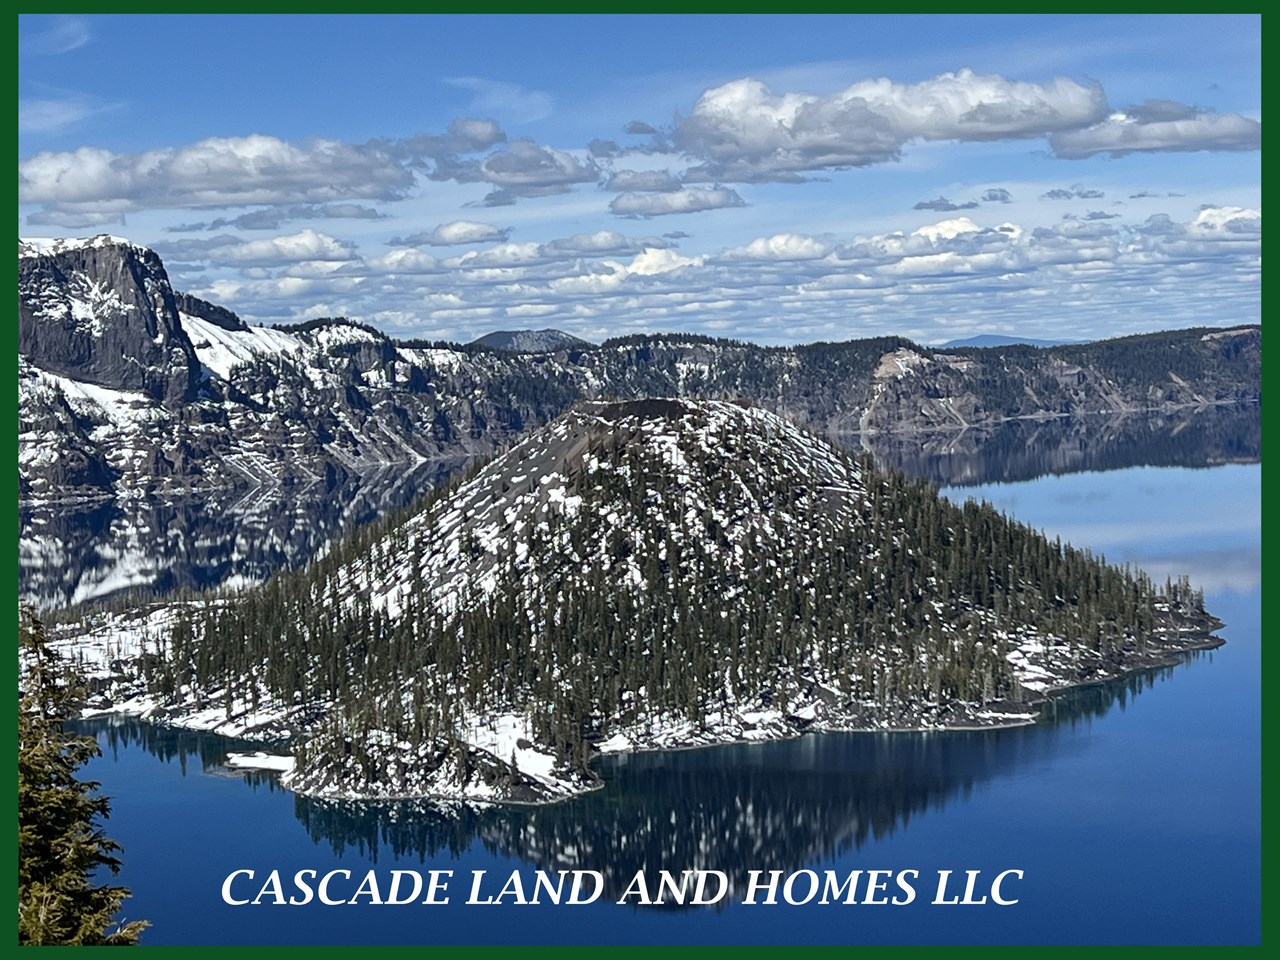 crater lake national park is only about 45 minutes away! camping, hiking, fishing, horseback riding, there is just so much to do nearby!